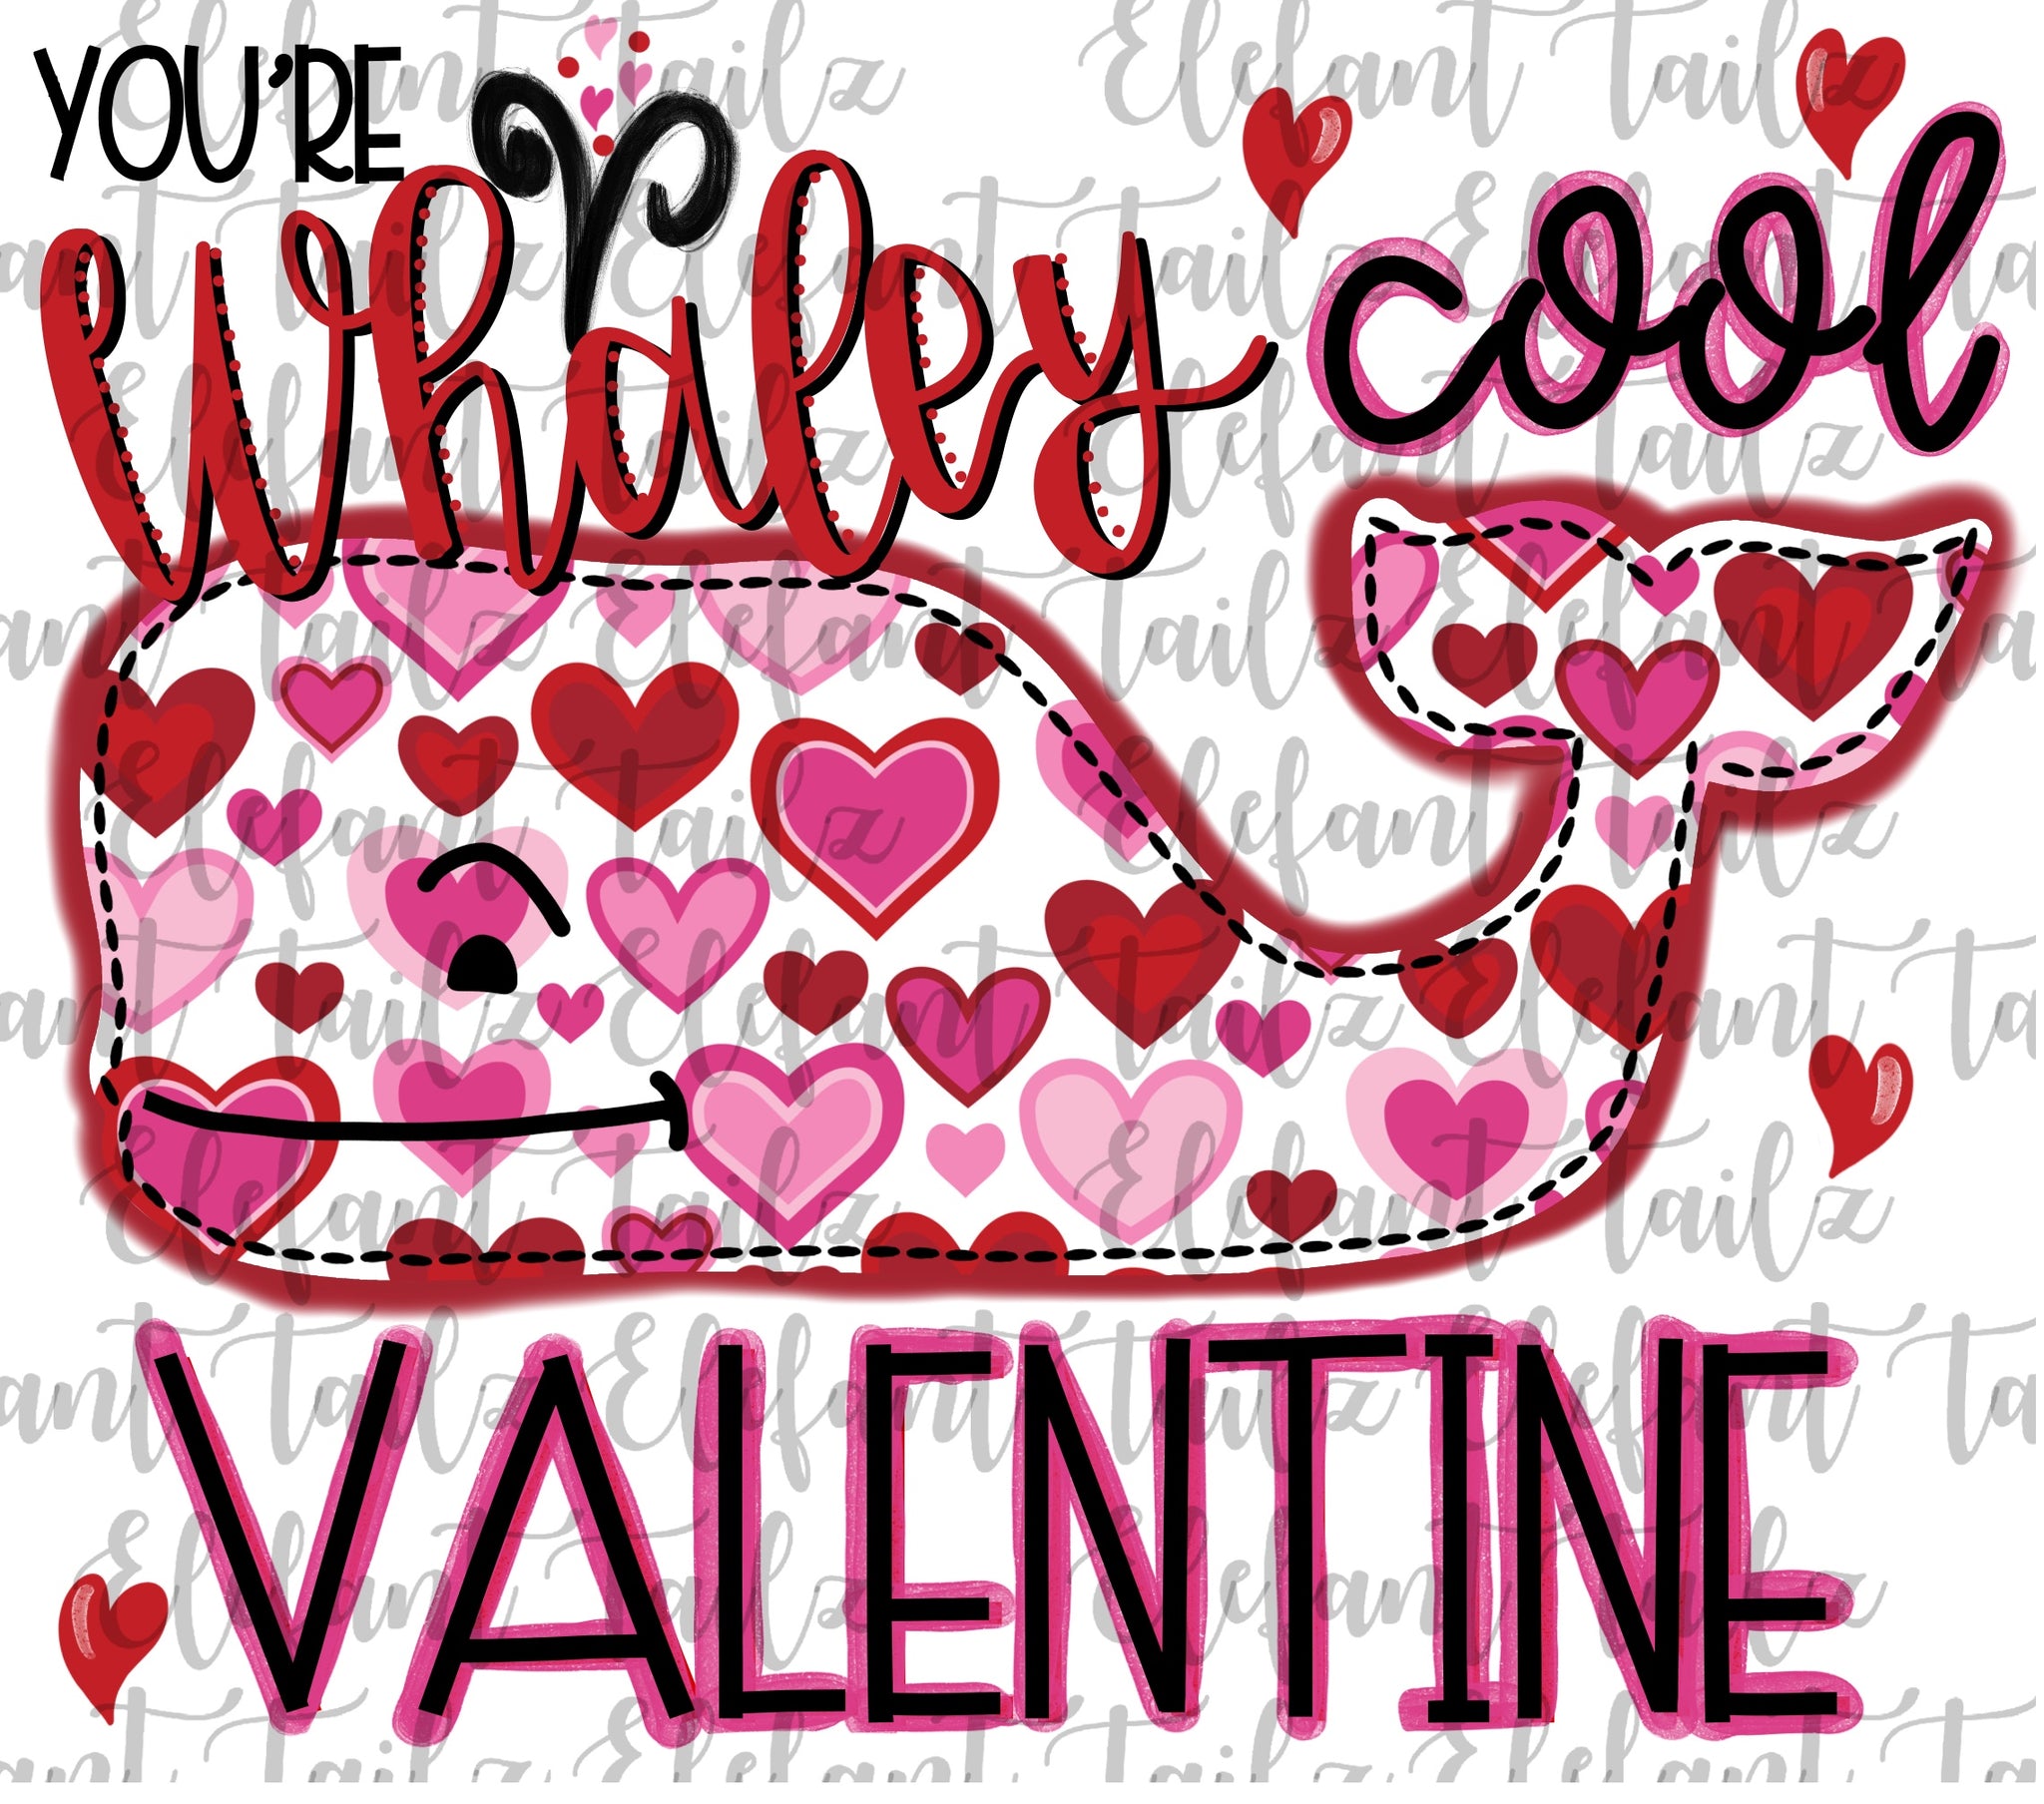 Whaley Cool Valentine Hearts